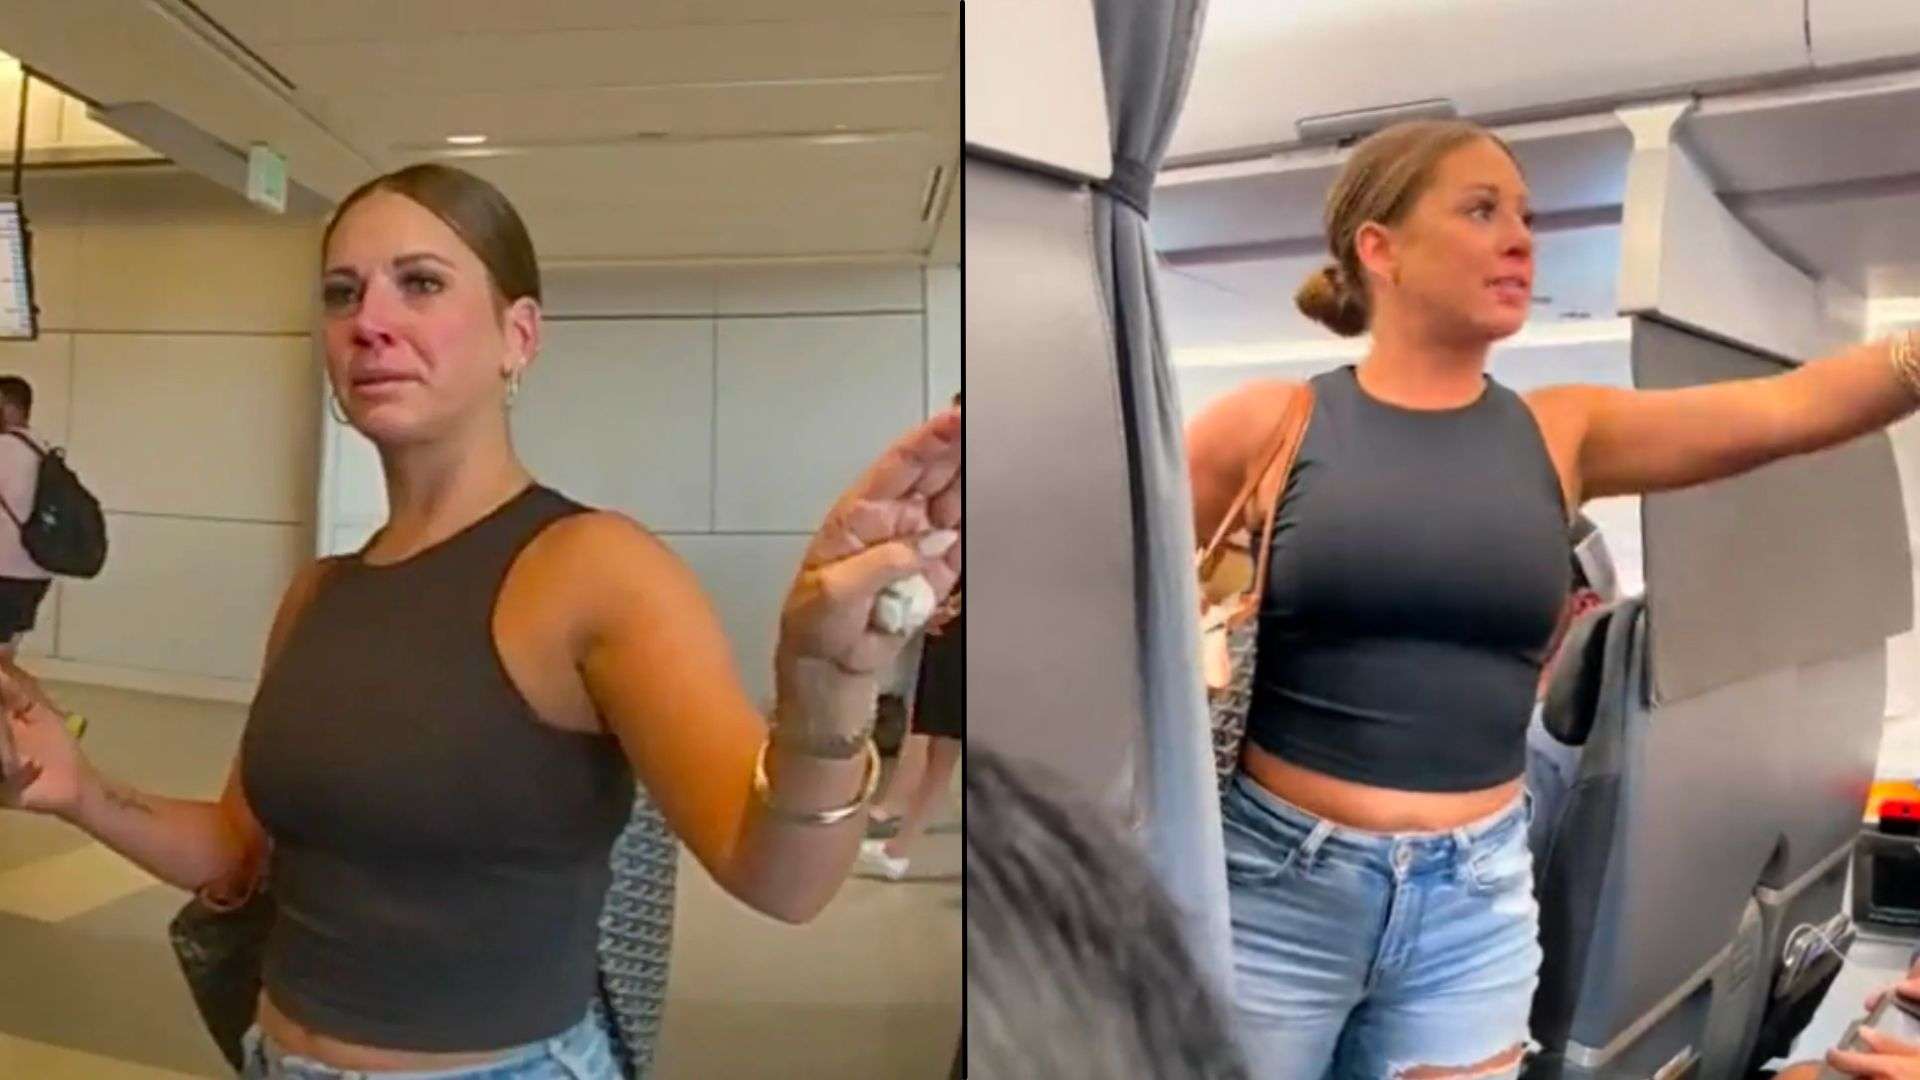 Tiffany Gomas from viral not real plane video arguing with police and on plane